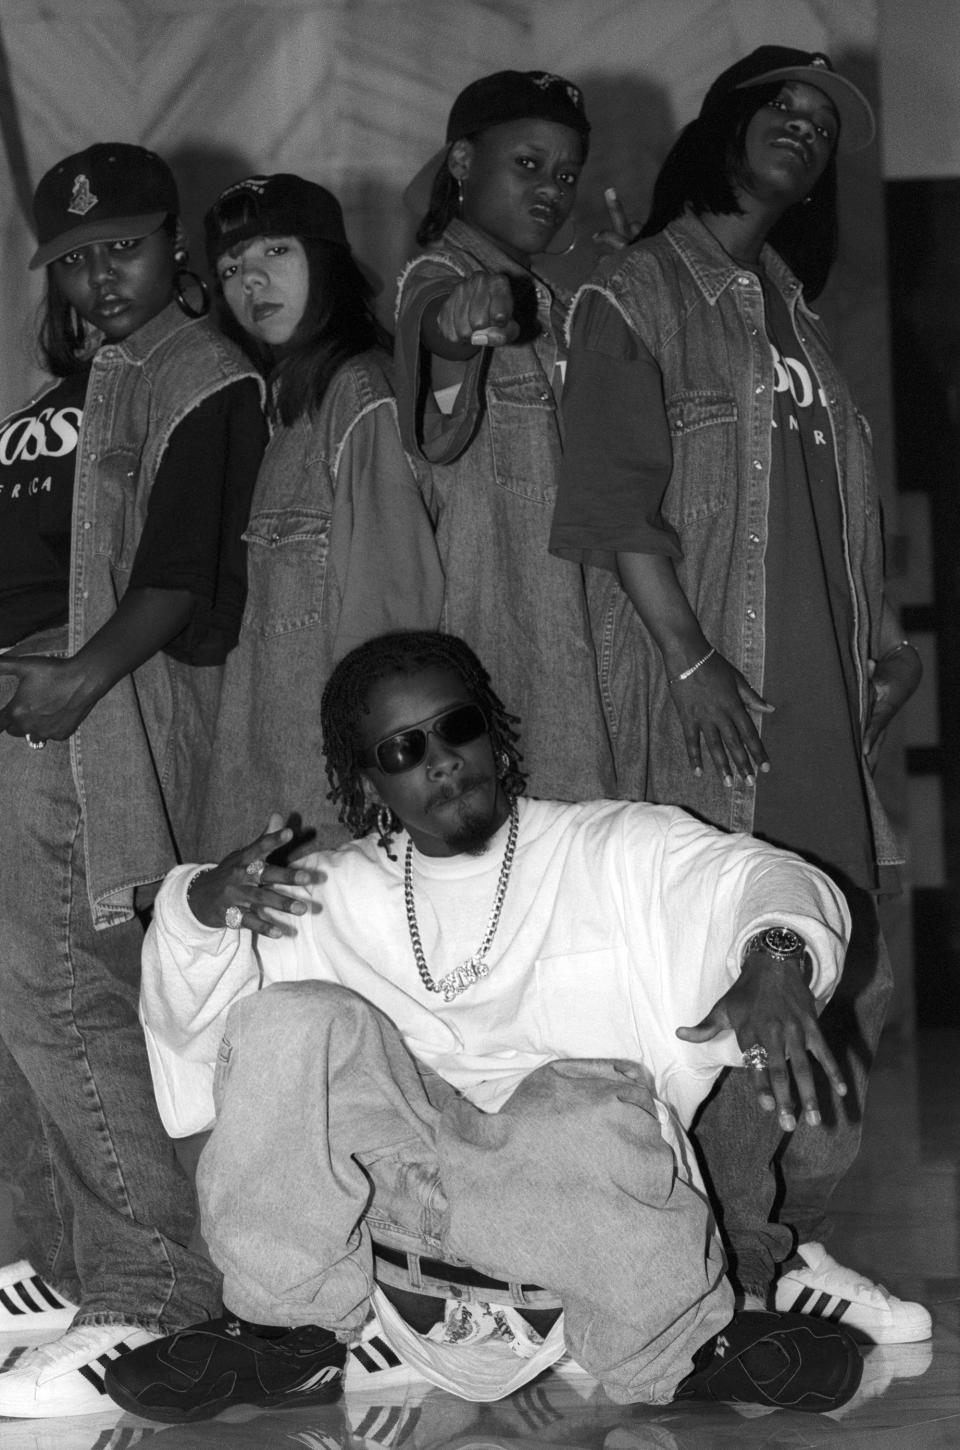 NEW YORK, NEW YORK–MAY 26: Jermaine Dupri appears with the band X-Scape (Tameka “Tiny” Harris; LaTocha Scott; Tamika Scott; Kandi Burruss) in a portrait taken on May 26, 1993 in New York City. (Photo by Al Pereira/Michael Ochs Archives/Getty Images)